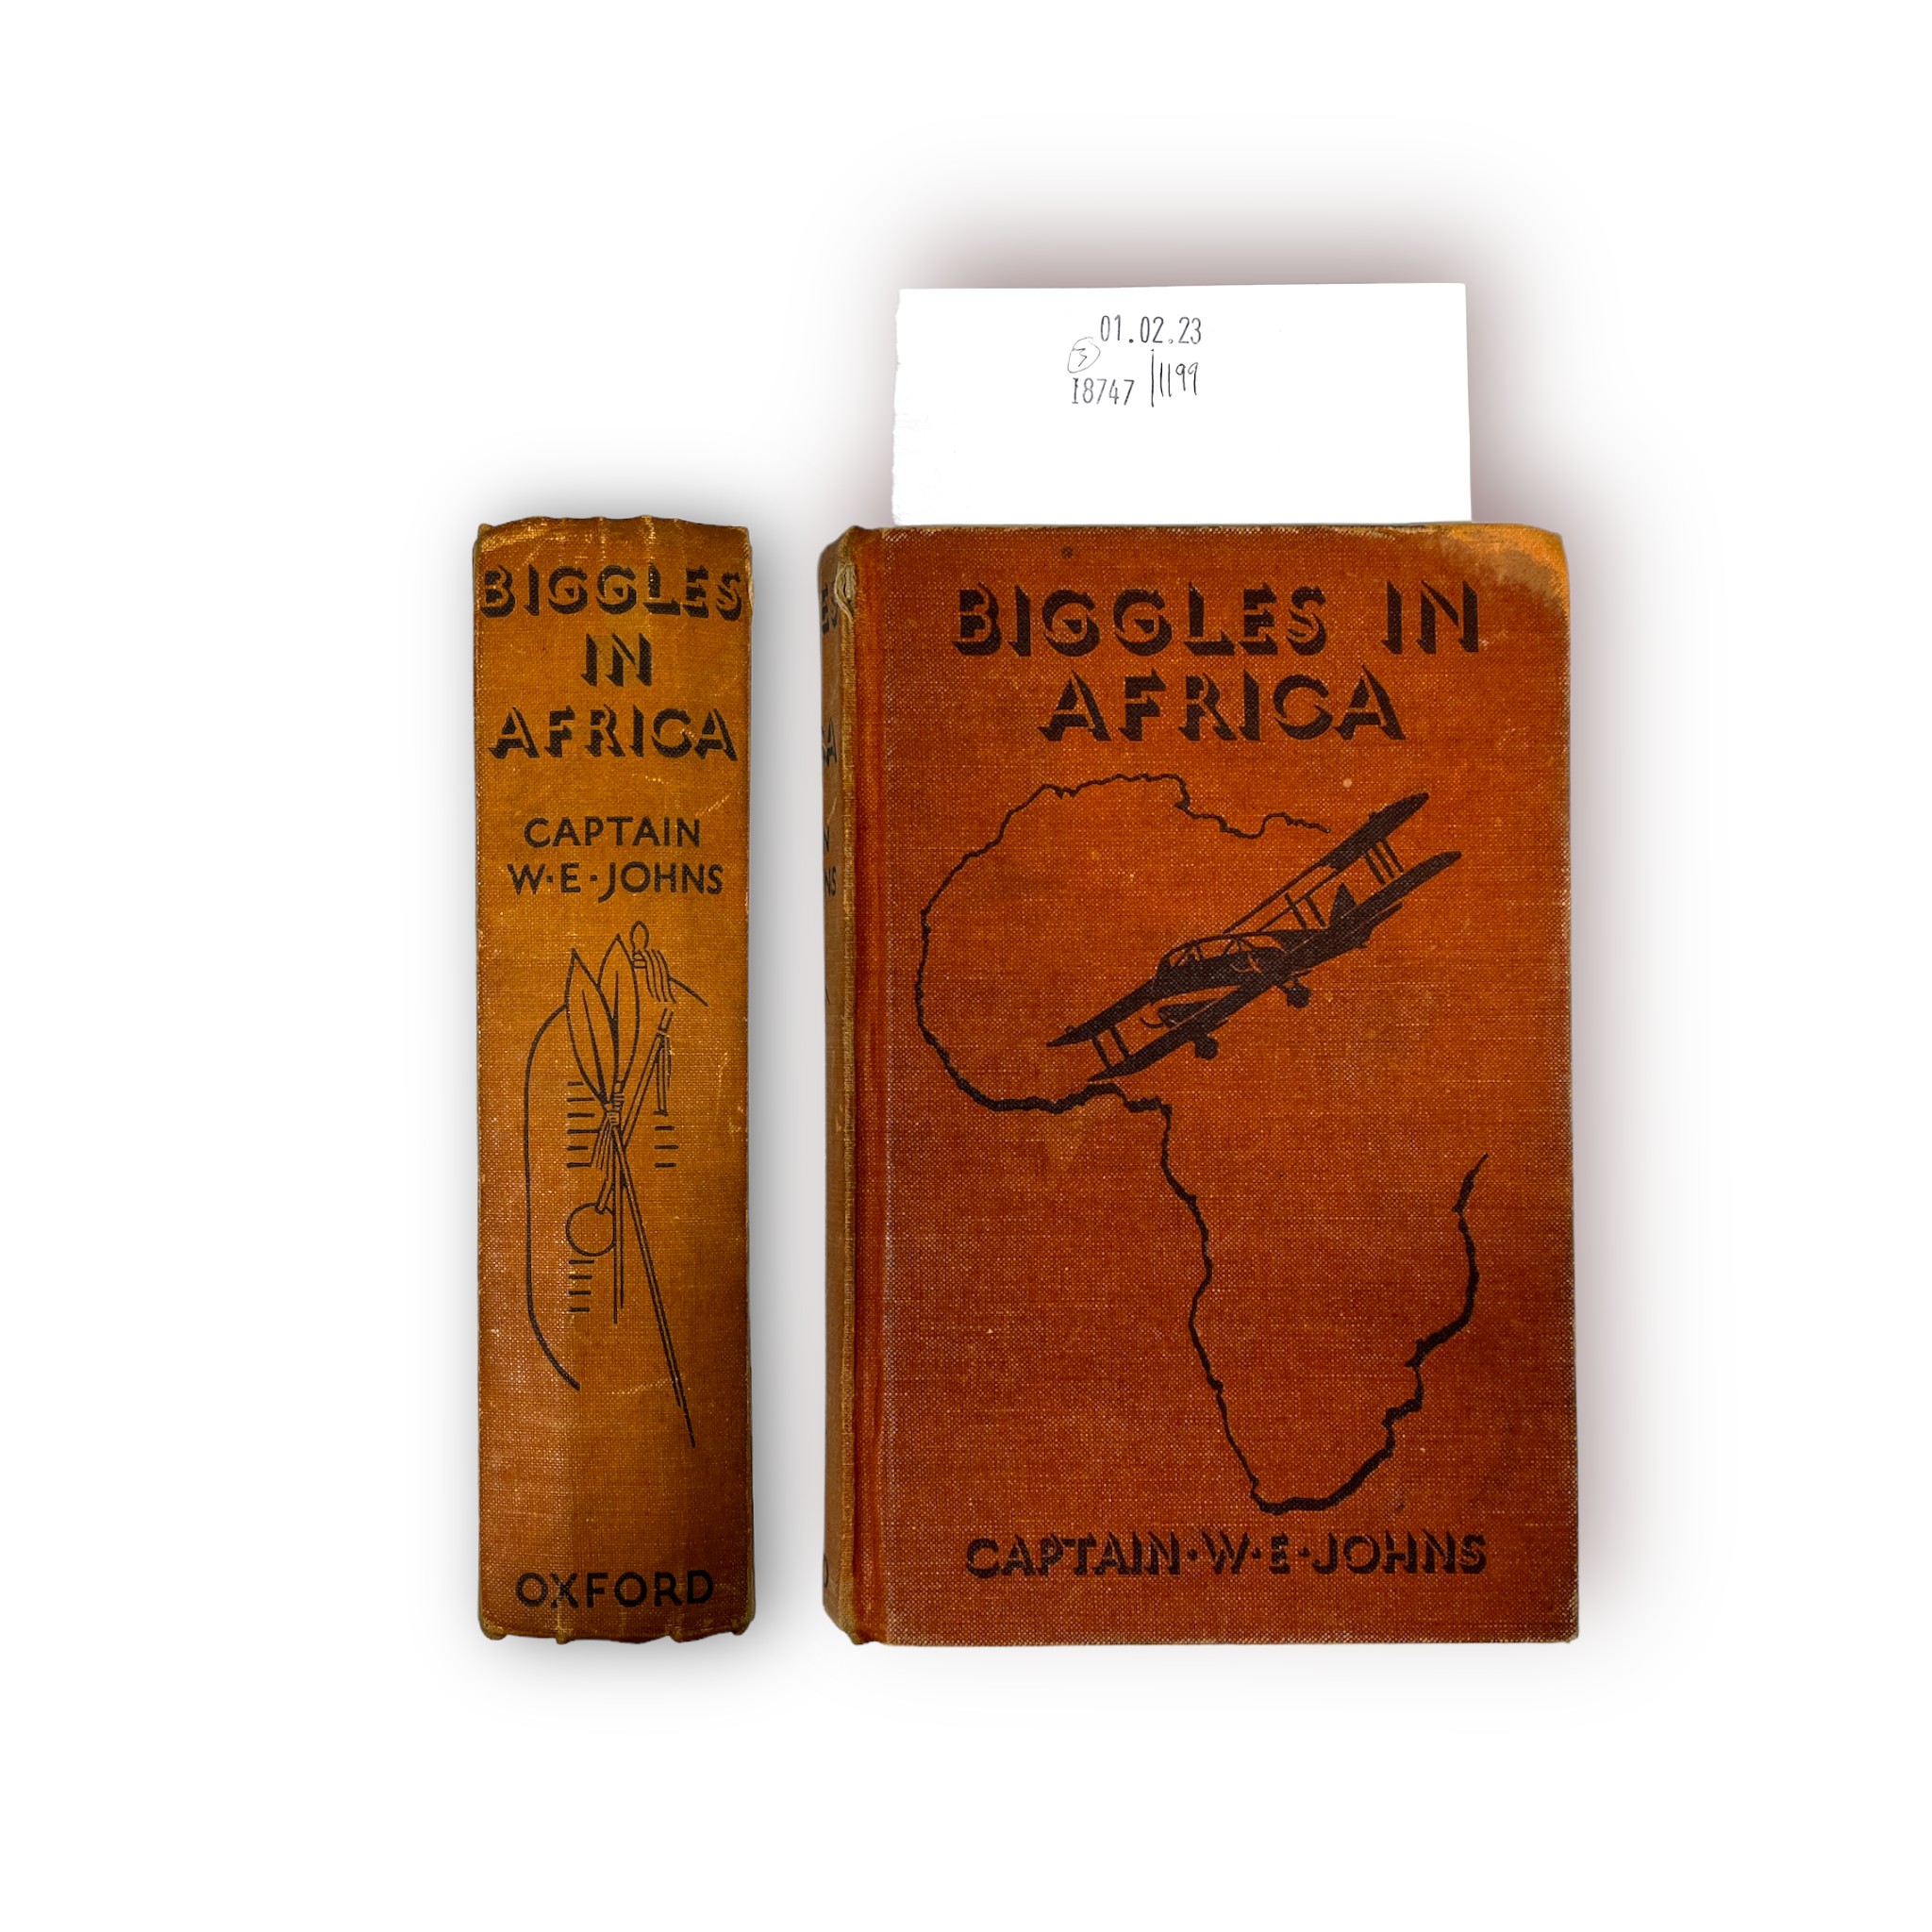 Johns, Capt. W.E. Three volumes, 'Biggles & Co.', First Edition, Published by The Oxford - Image 2 of 4